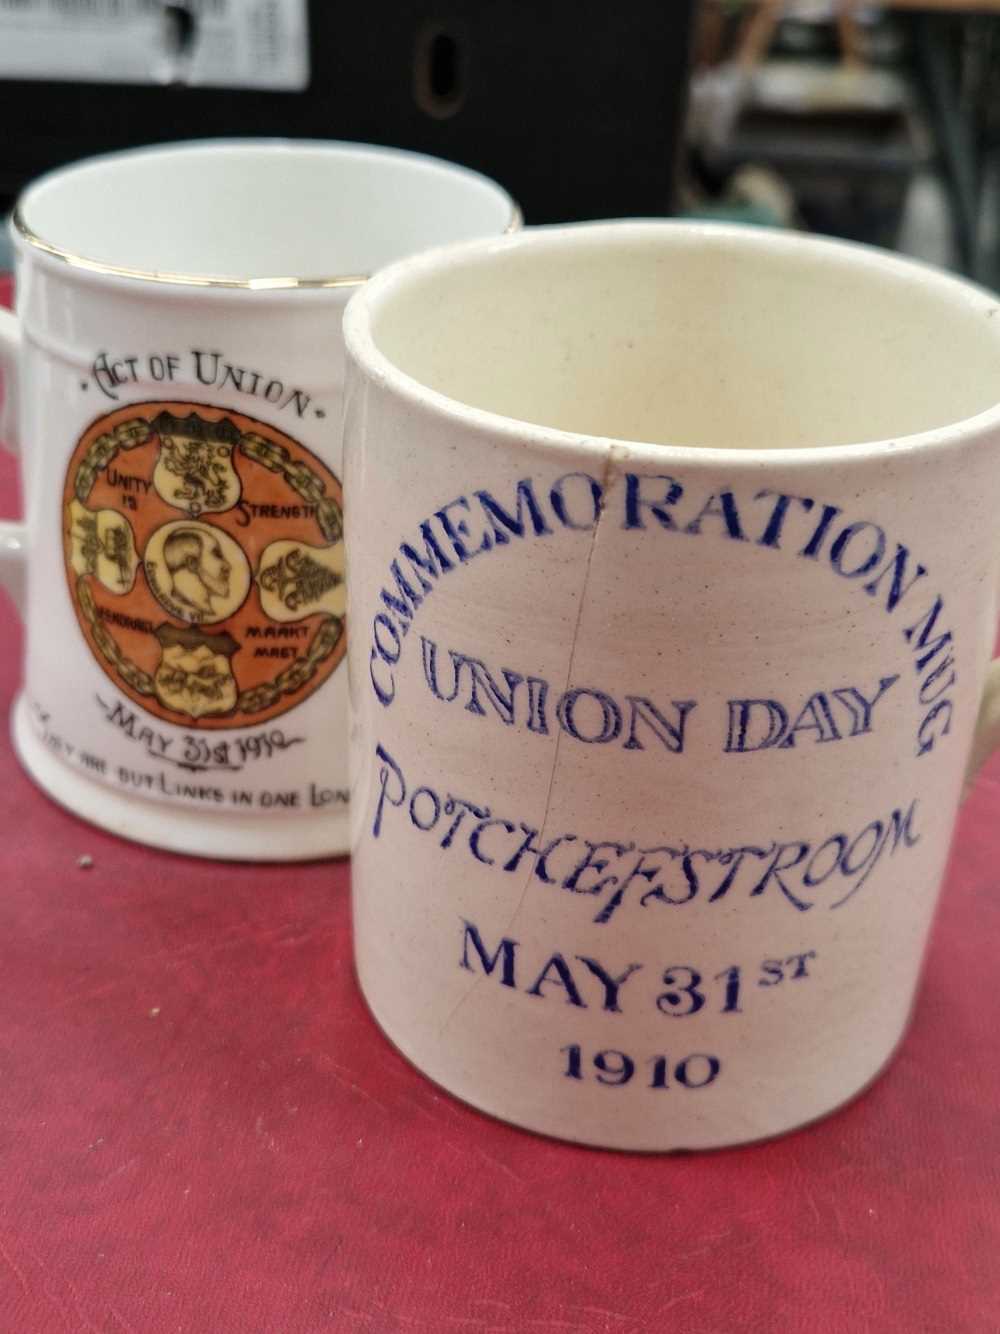 Two rare South Africa commemorative union day 1910 mugs.